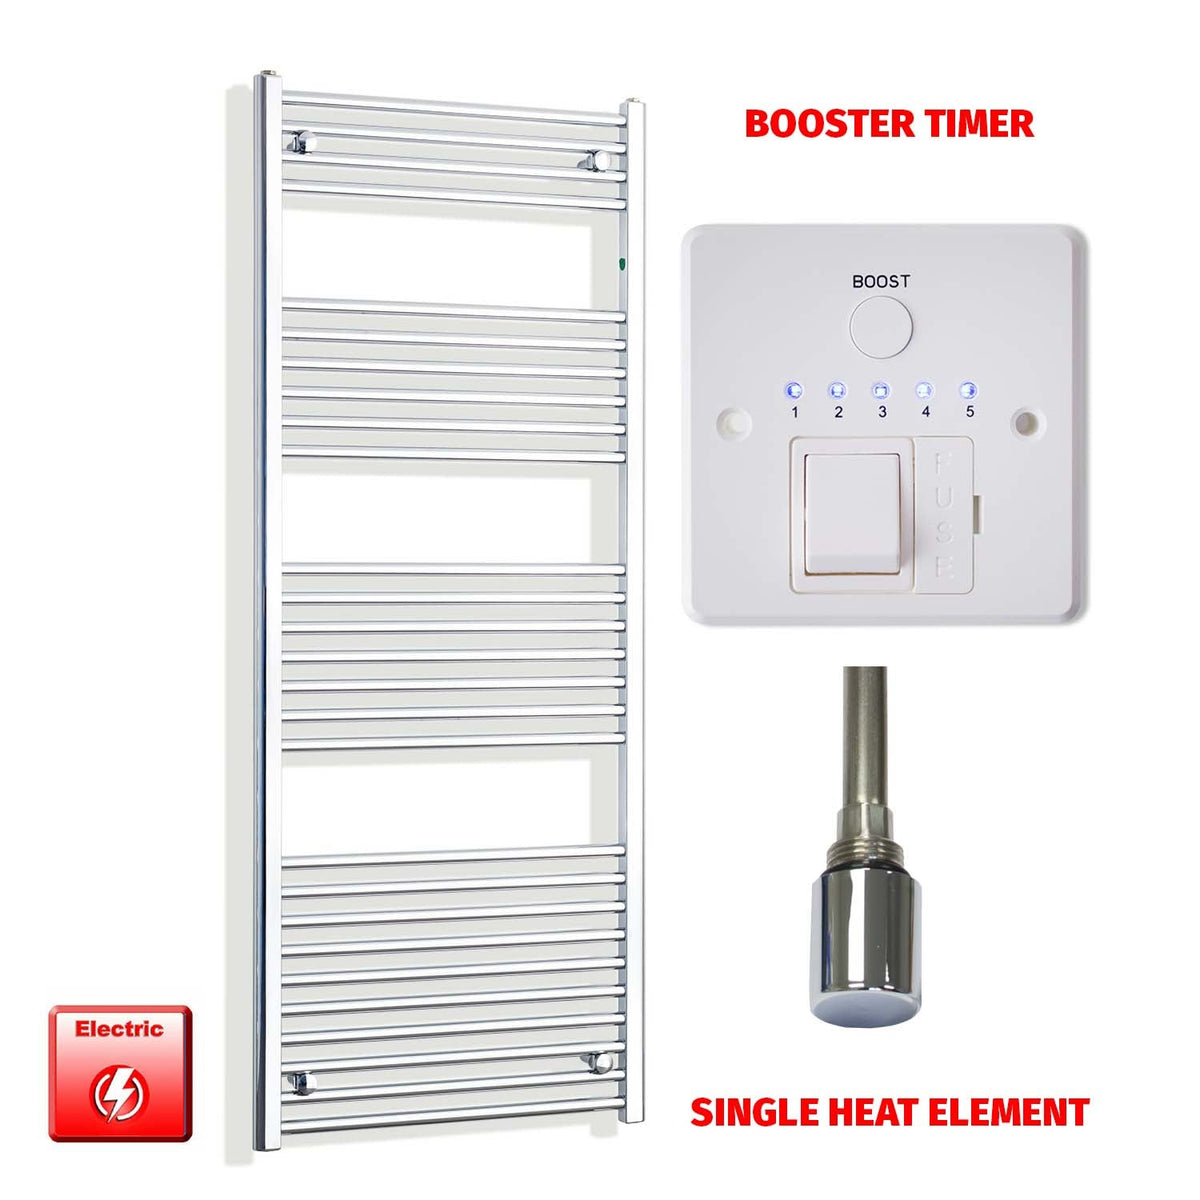 1600mm High 550mm Wide Electric Heated Towel Radiator Straight Chrome Single heat element Booster timer